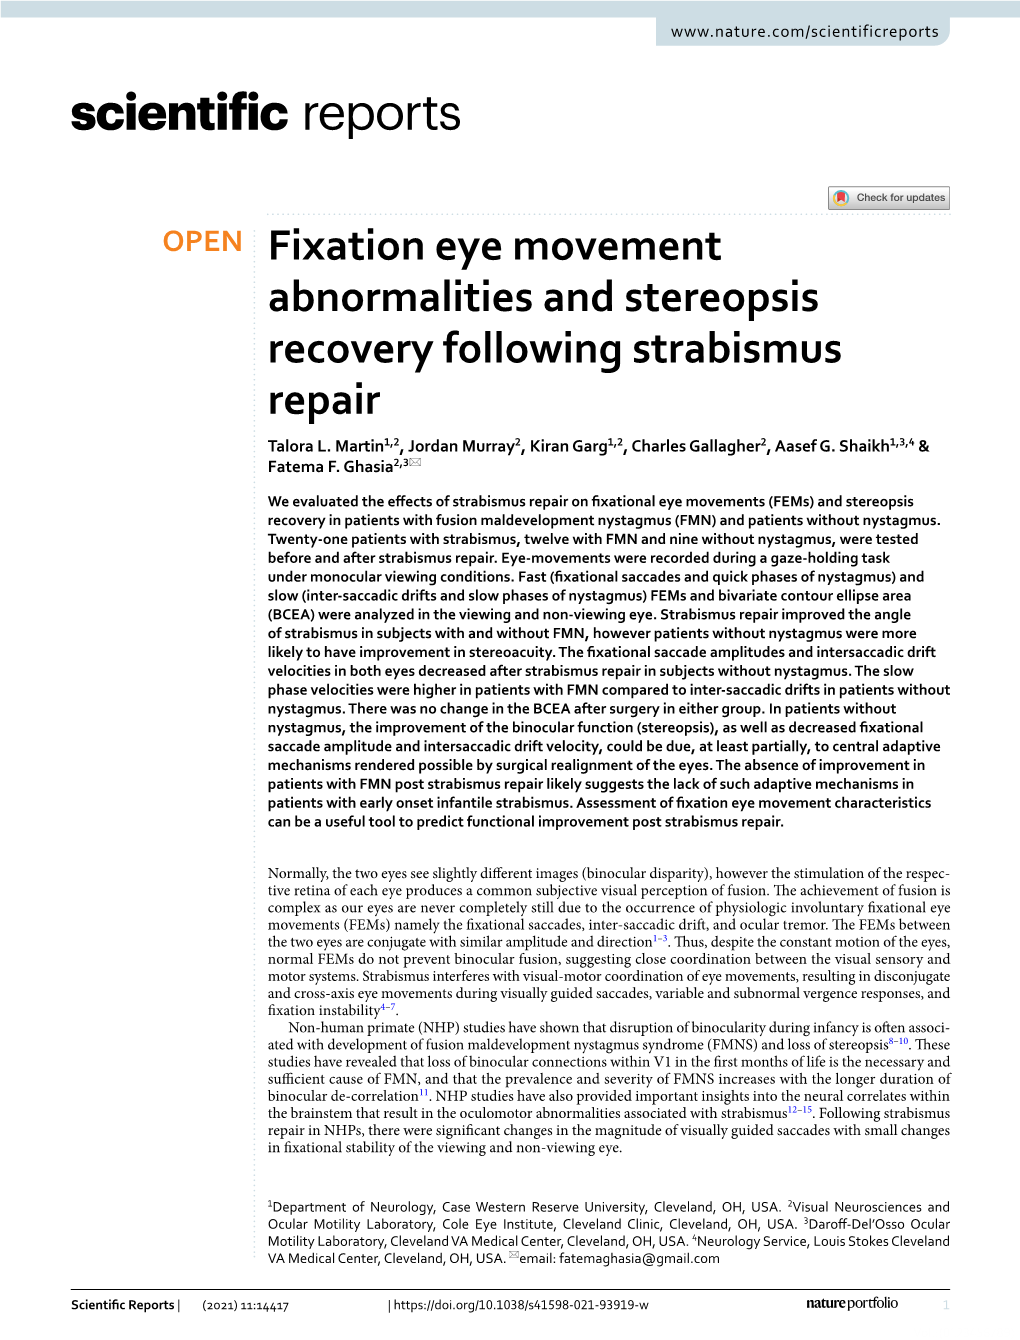 Fixation Eye Movement Abnormalities and Stereopsis Recovery Following Strabismus Repair Talora L